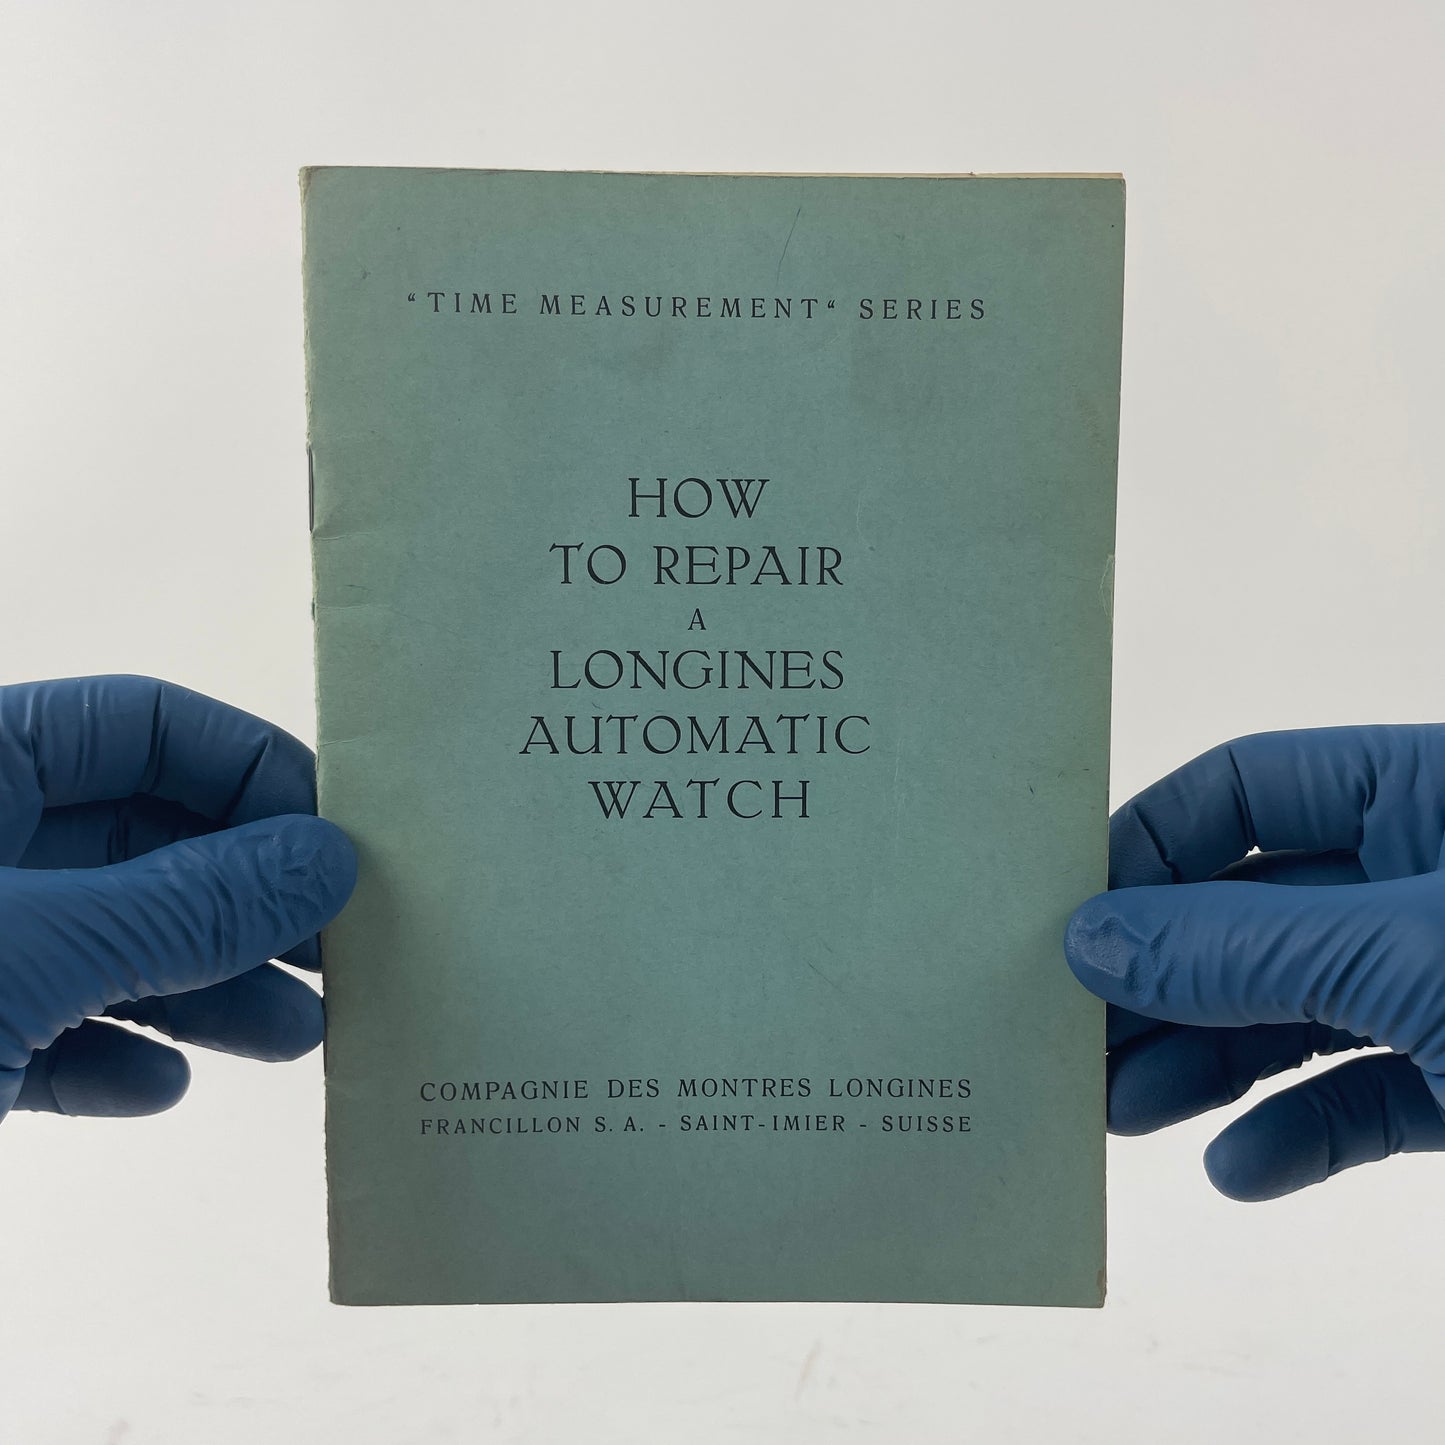 May Lot 45- How to Repair a Longines Automatic Watch